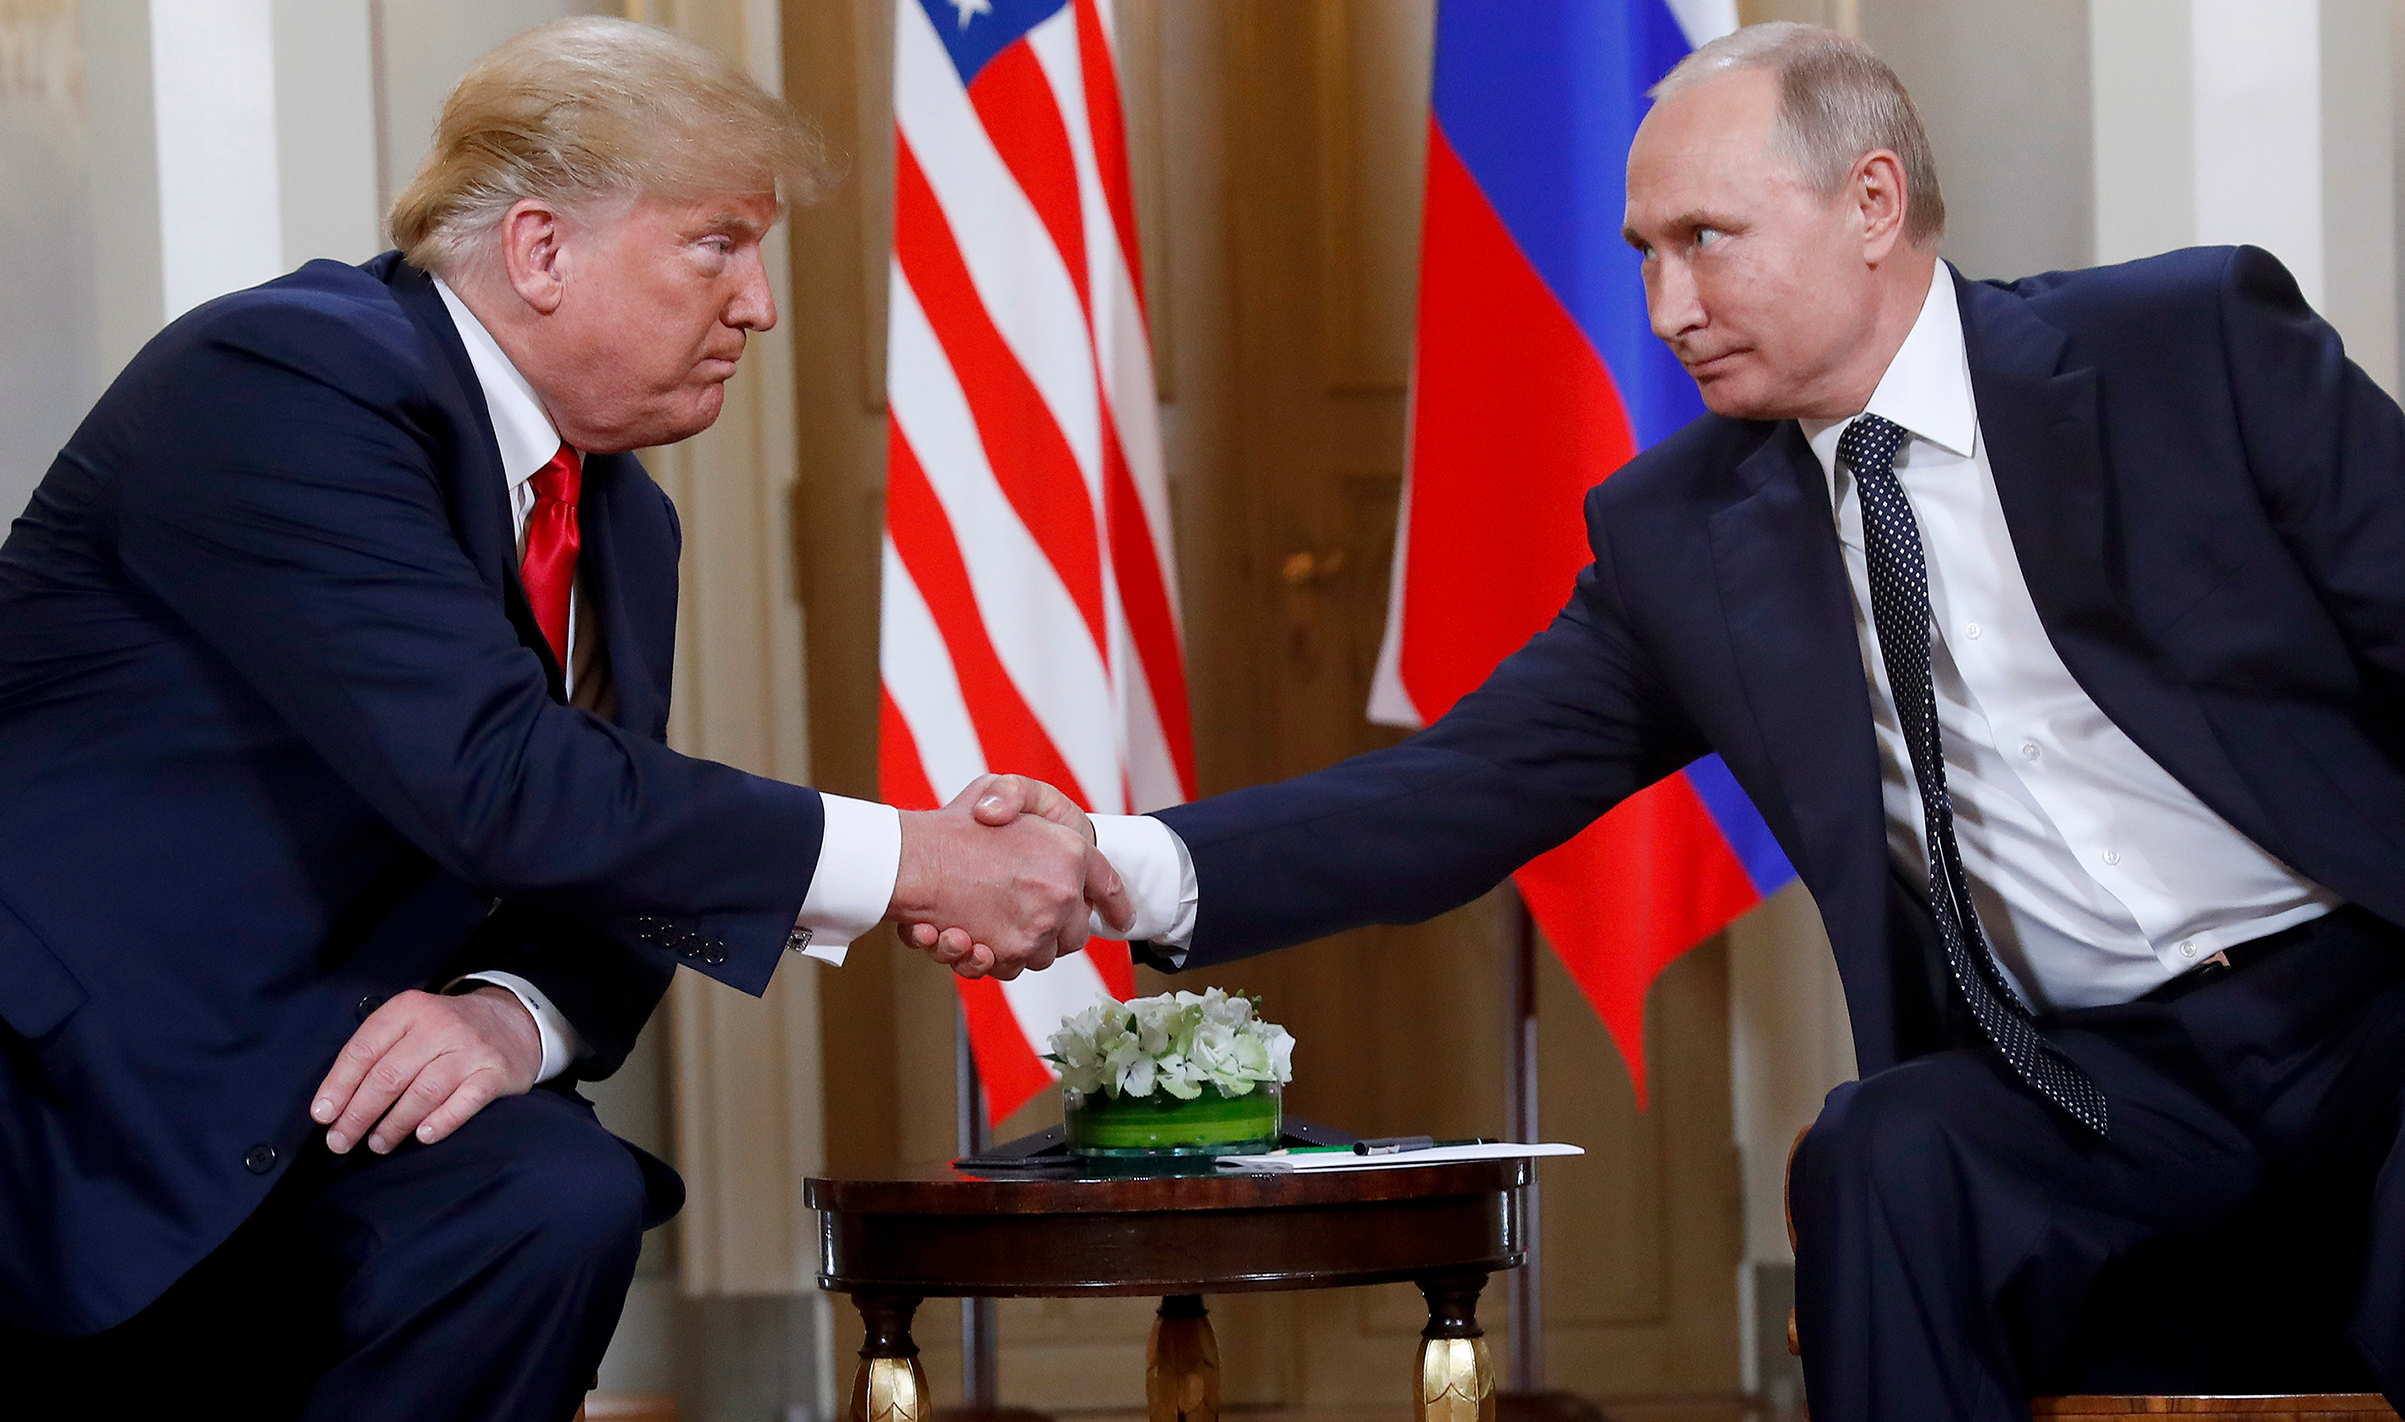 President Donald Trump and Russian President Vladimir Putin shake hands at the beginning of a meeting in Helsinki on July 15, 2018. (Pablo Martinez Monsivais—AP)